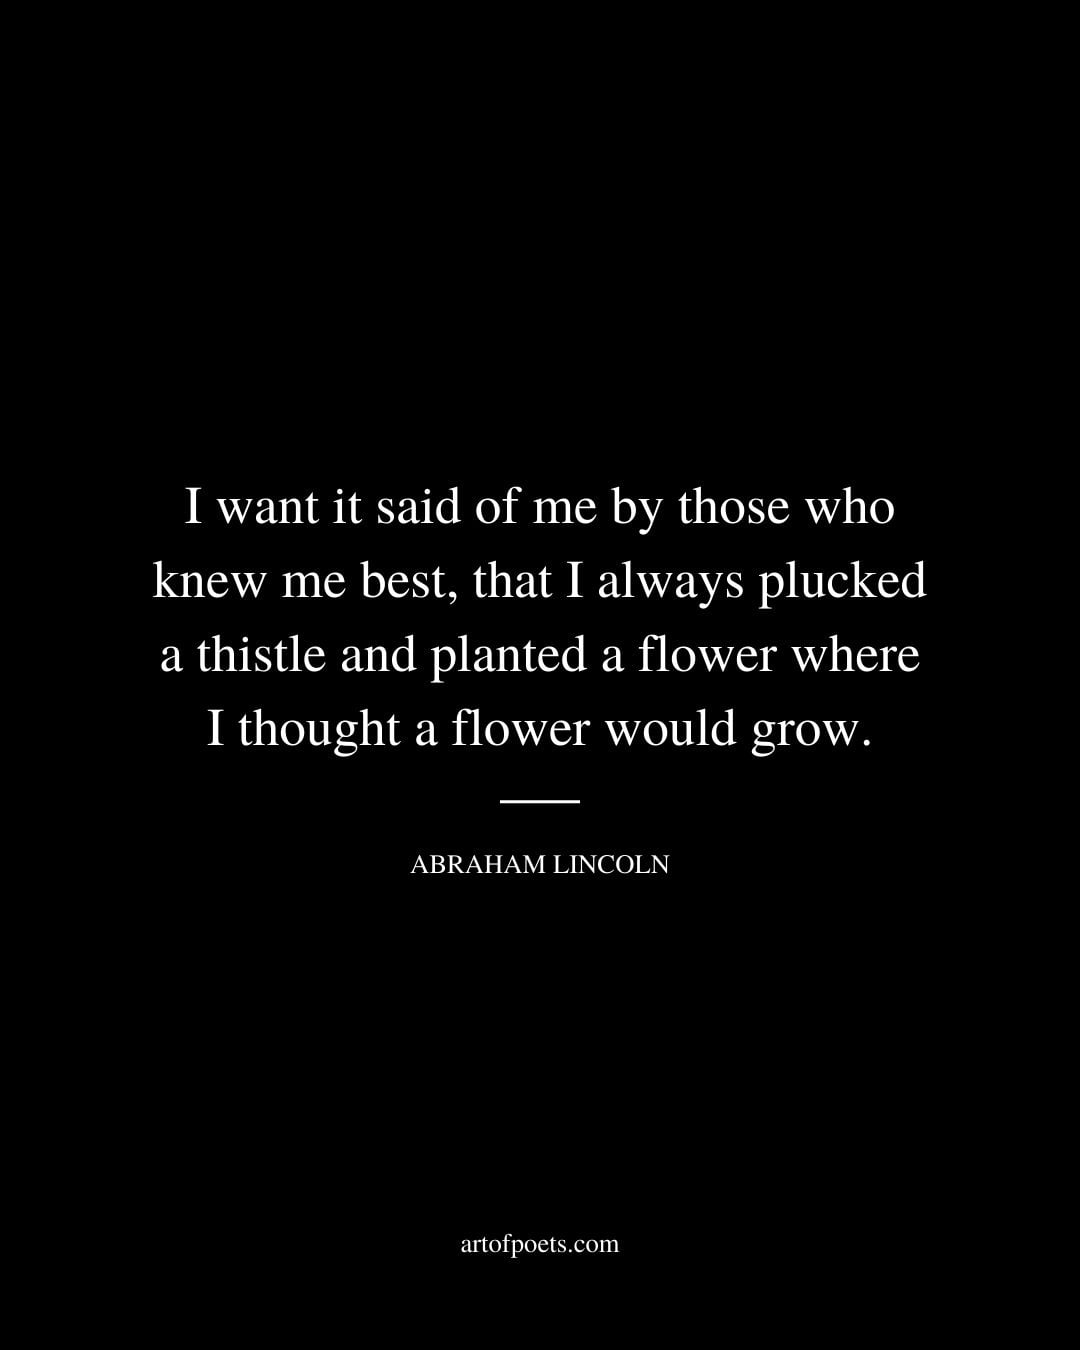 I want it said of me by those who knew me best that I always plucked a thistle and planted a flower where I thought a flower would grow. – Abraham Lincoln